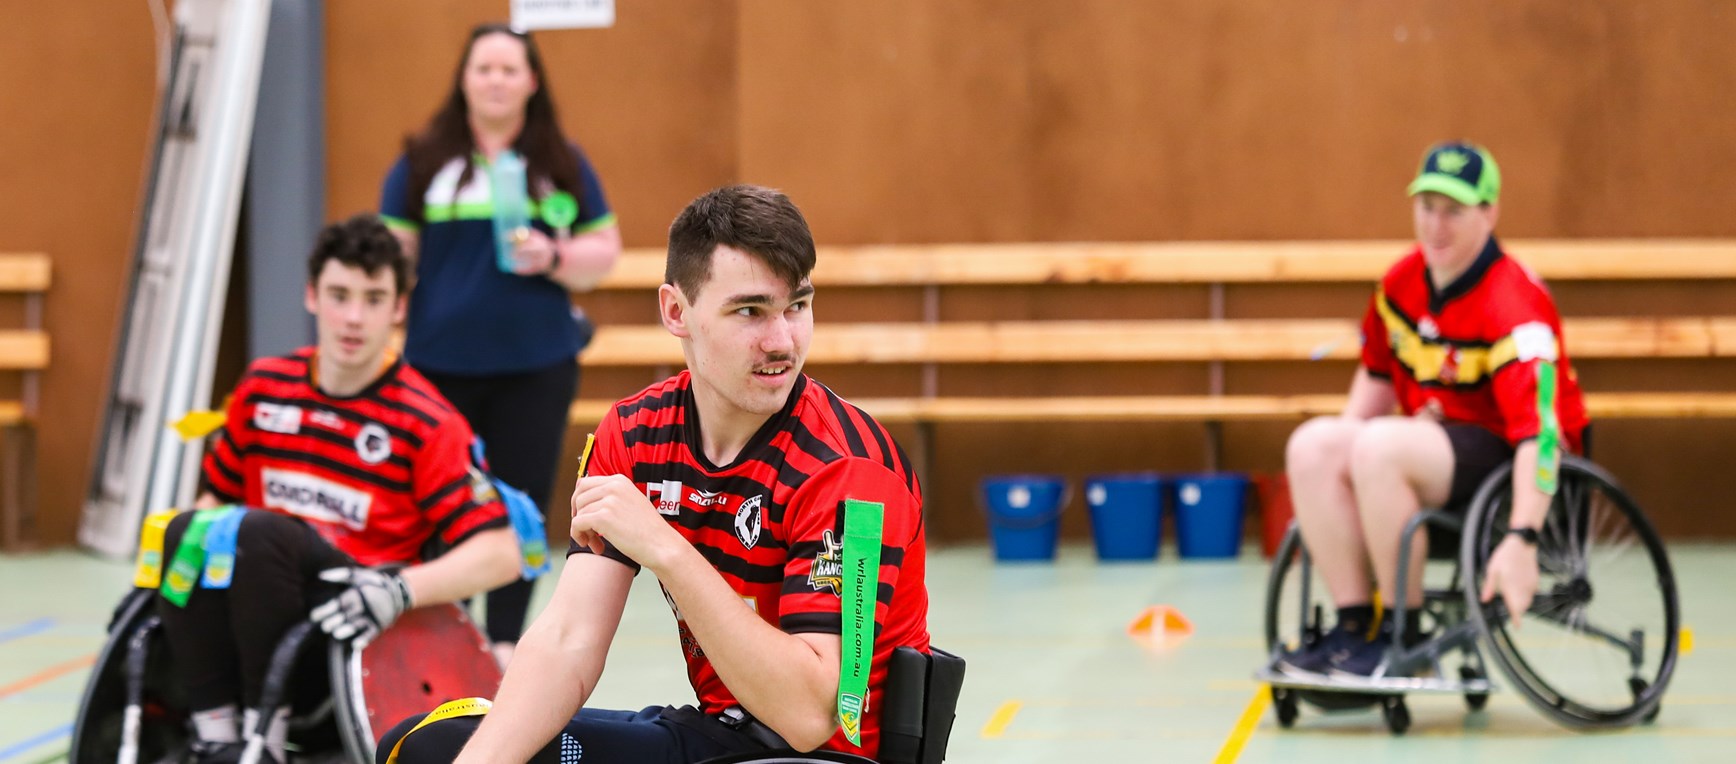 Gallery: Wheelchair Rugby League Come and Try Event